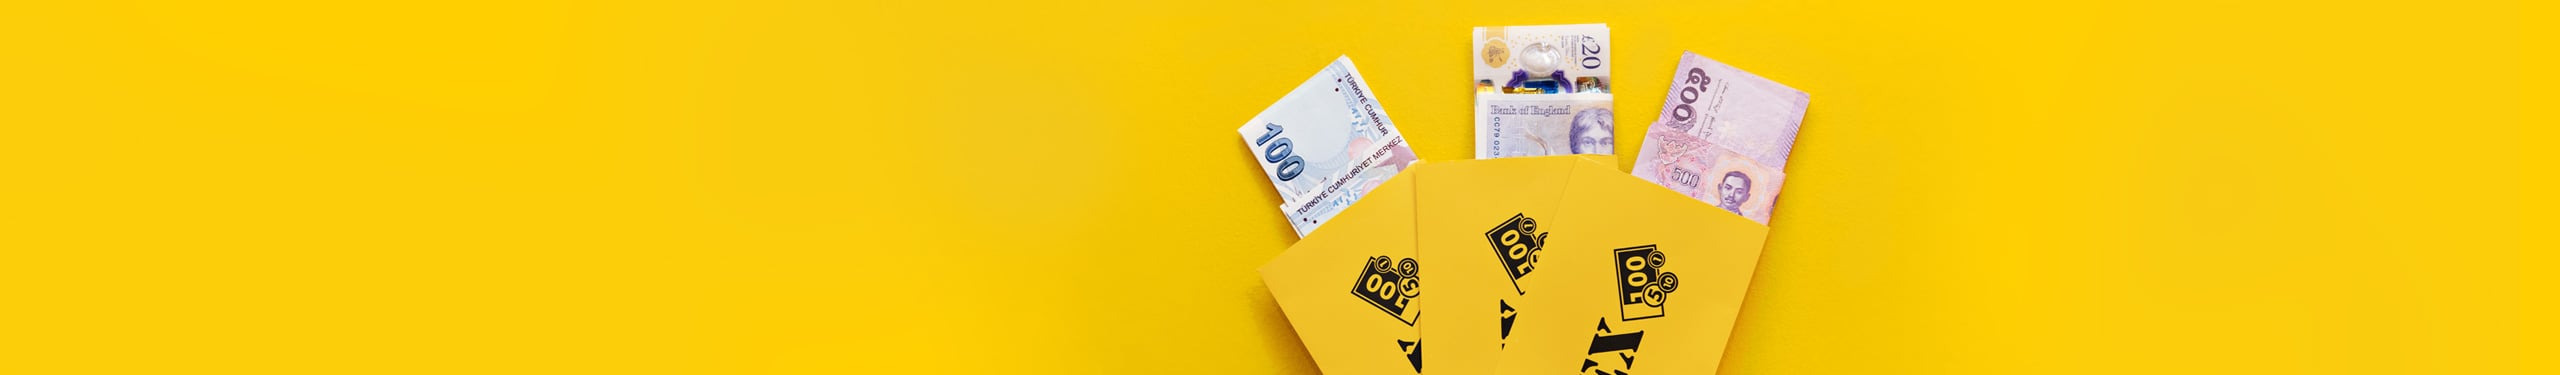 Currency in yellow FOREX envelopes